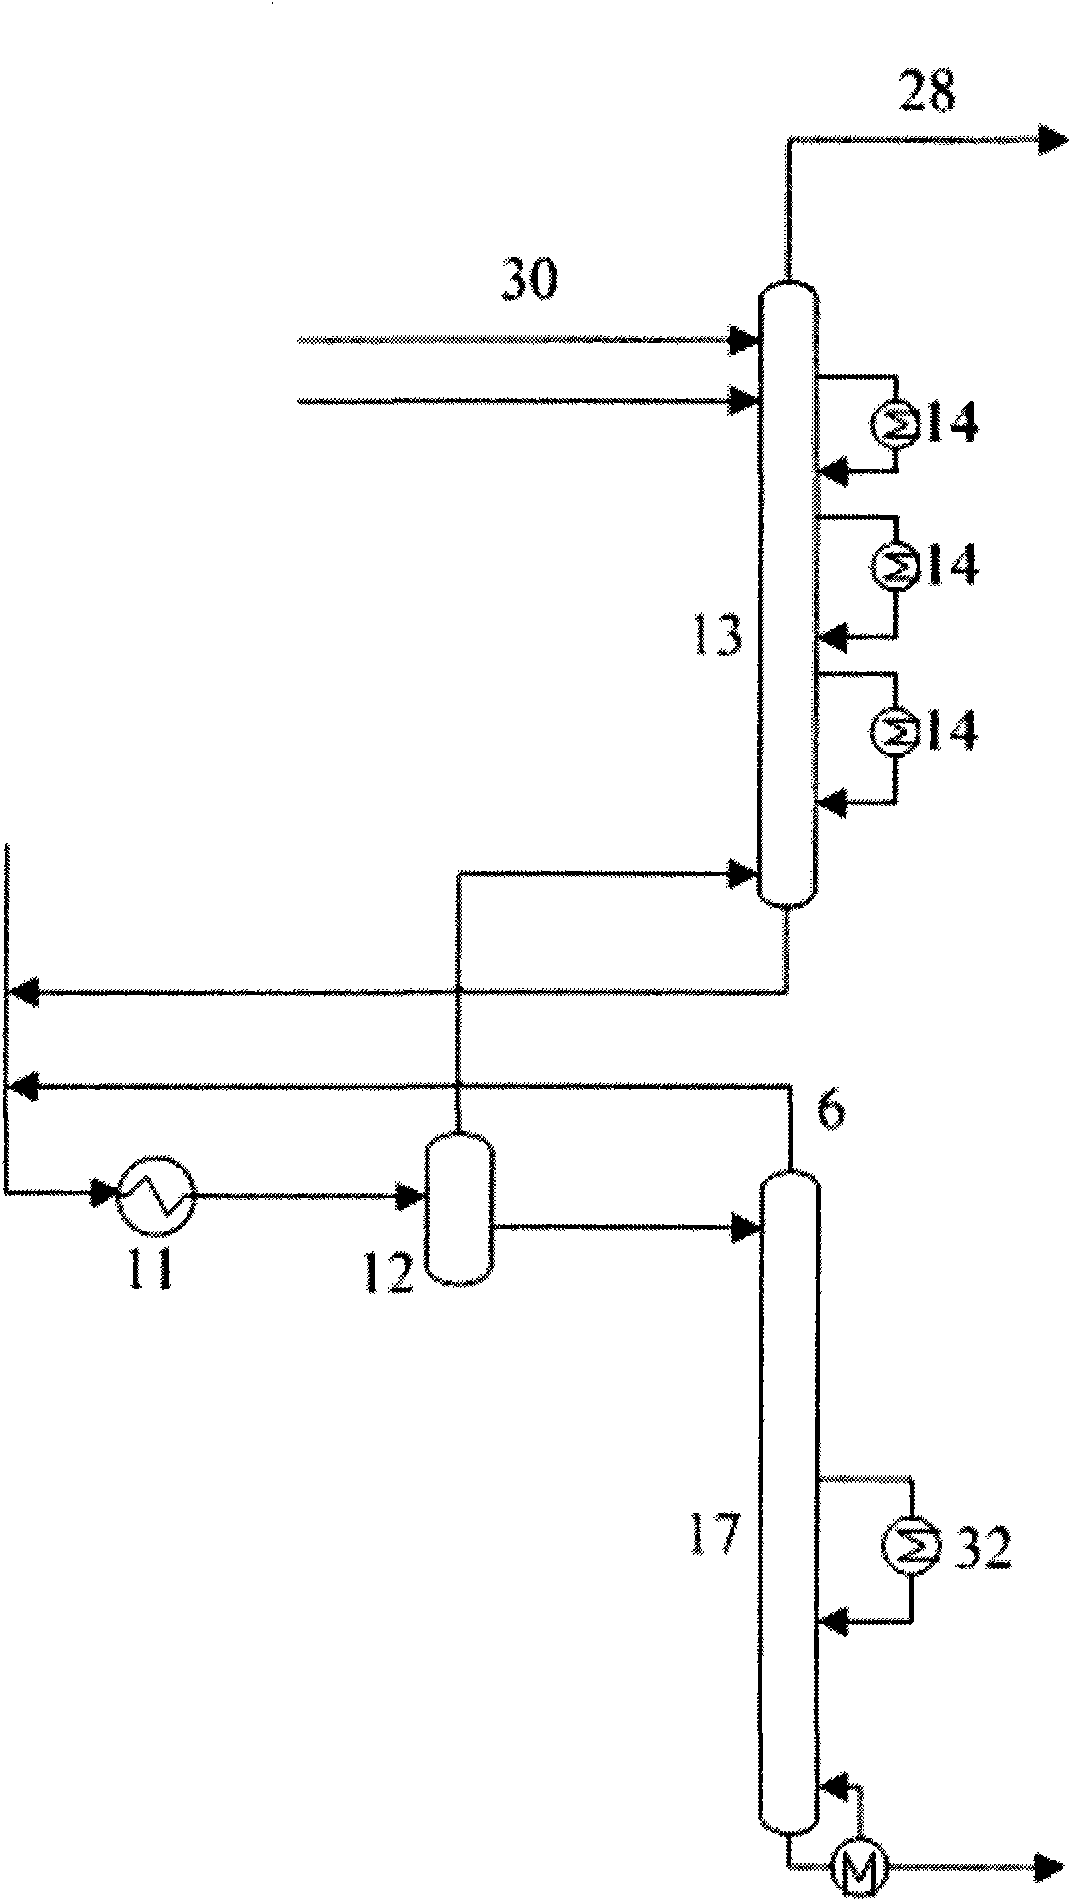 Method for saving energy and producing more propylene in absorption-stabilization system by catalytic cracking